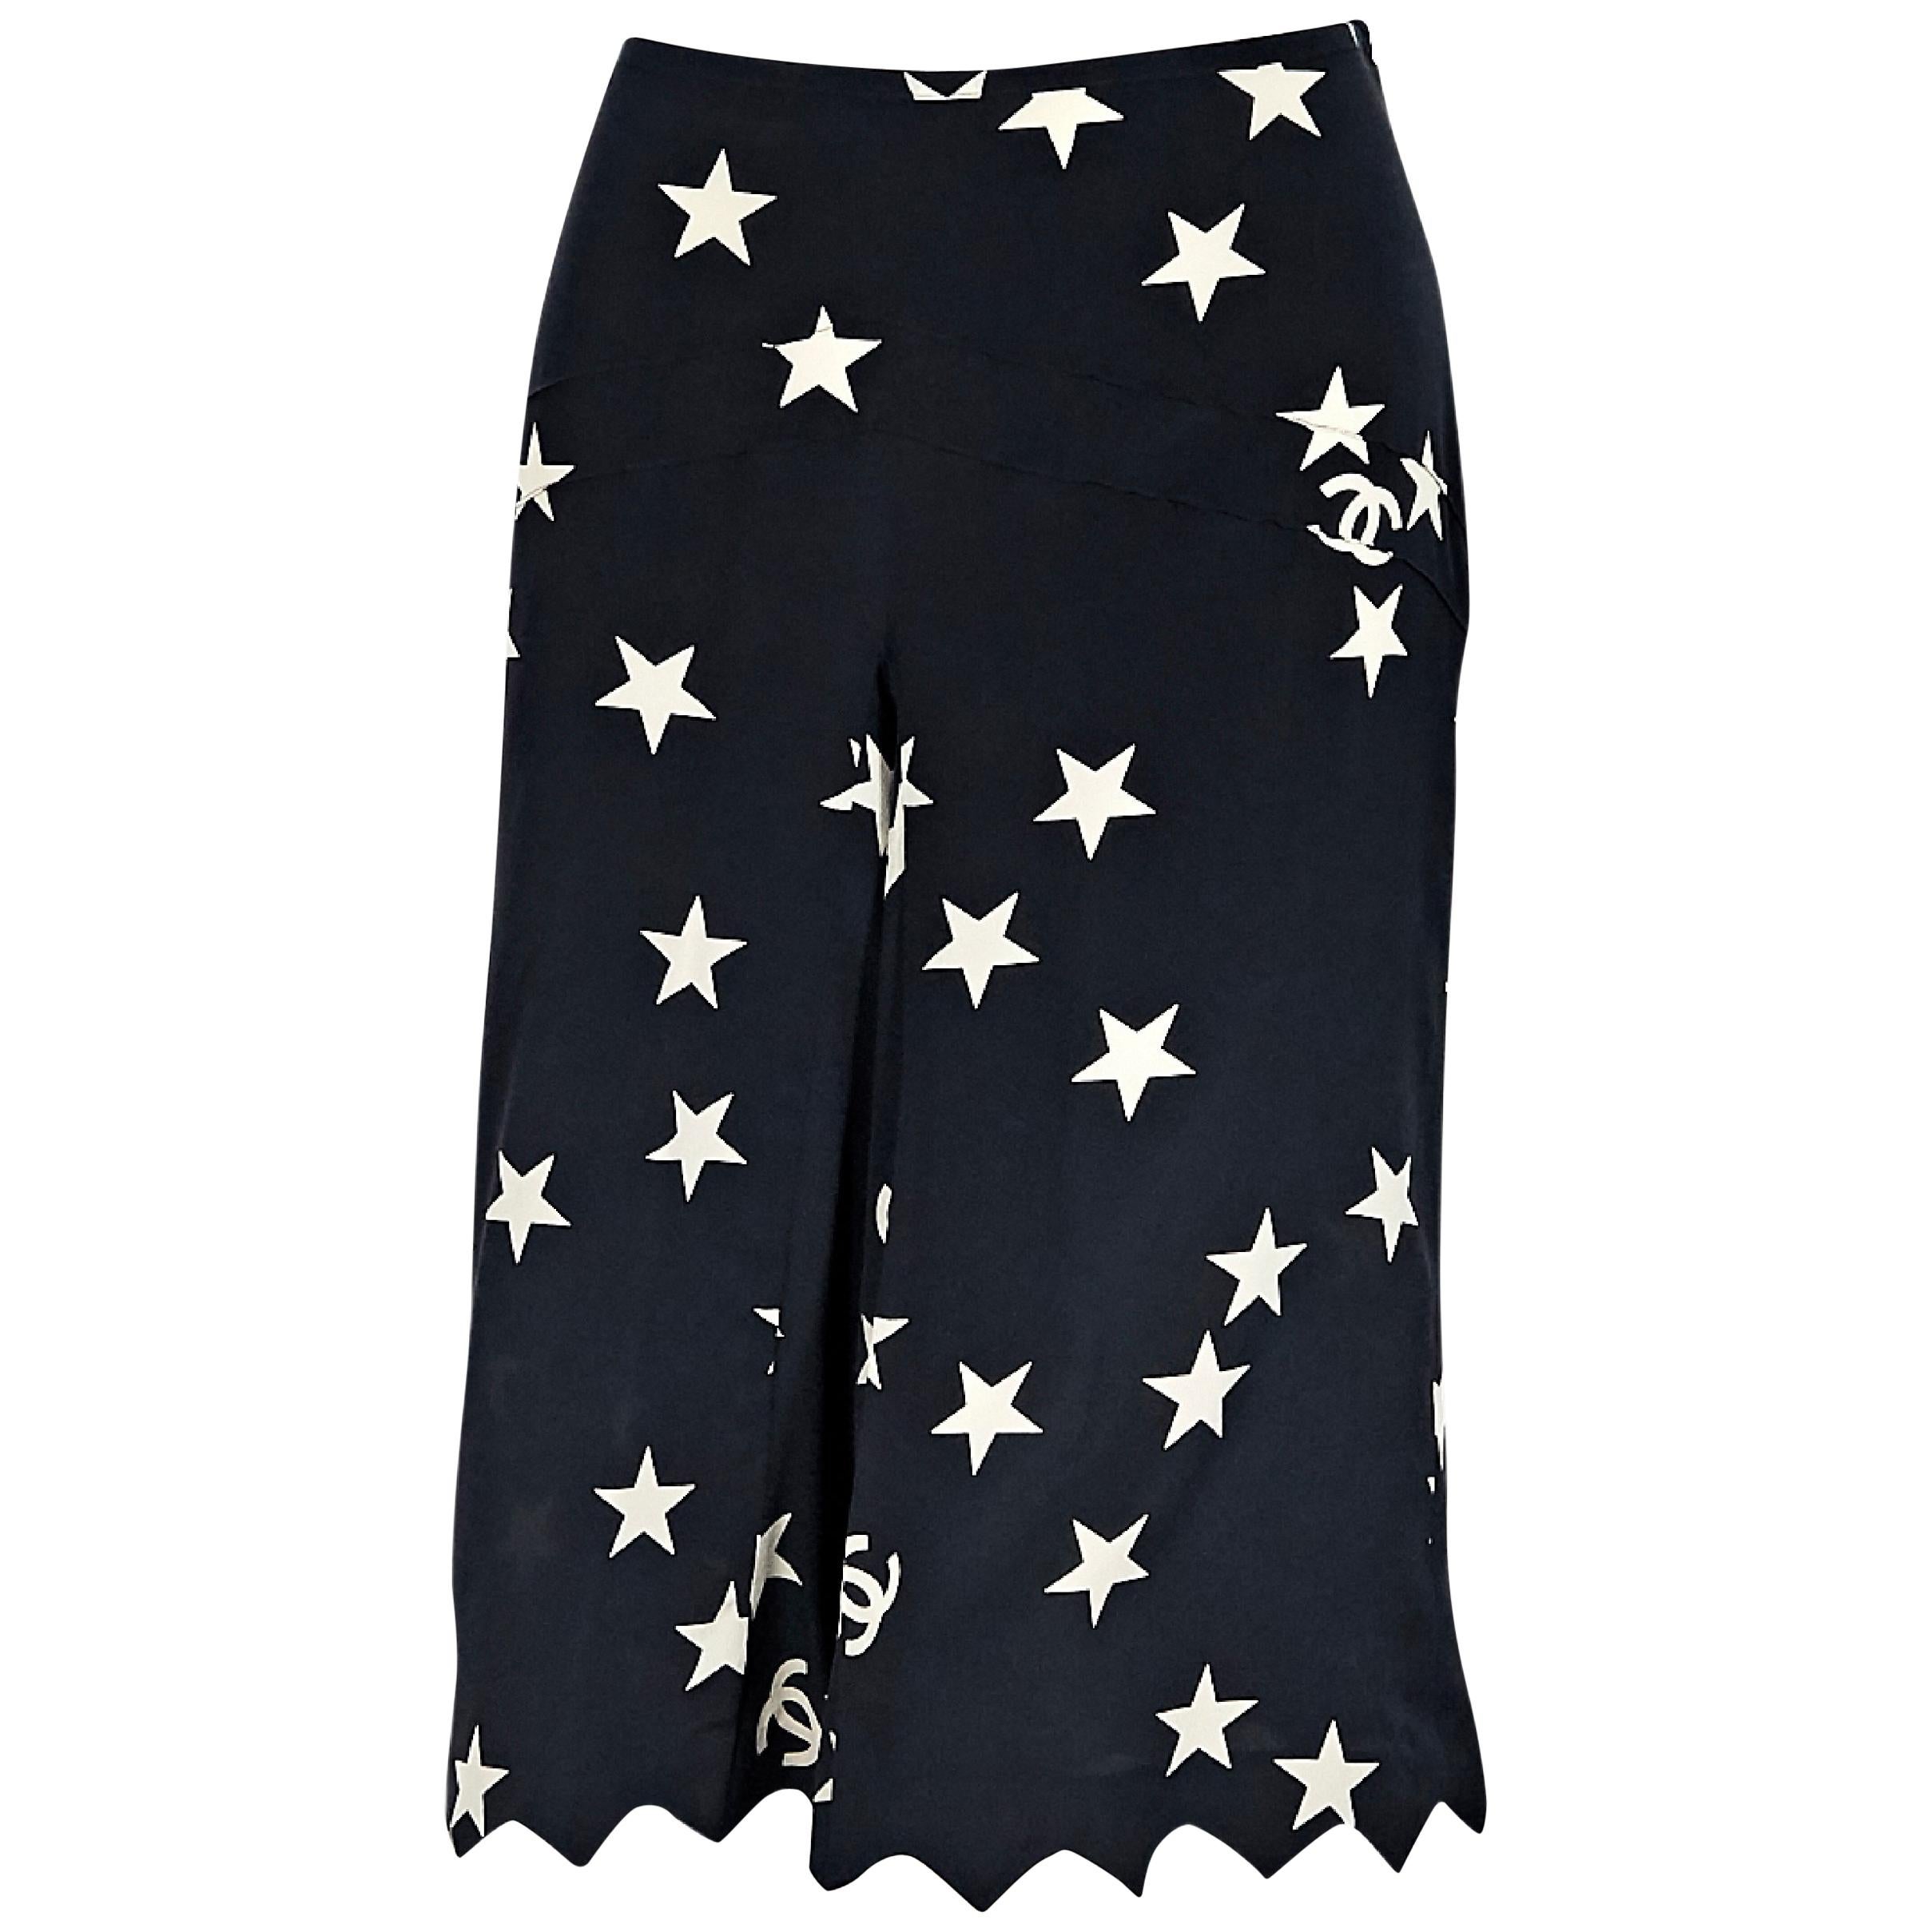 Chanel Navy Blue and White Printed Silk Culottes